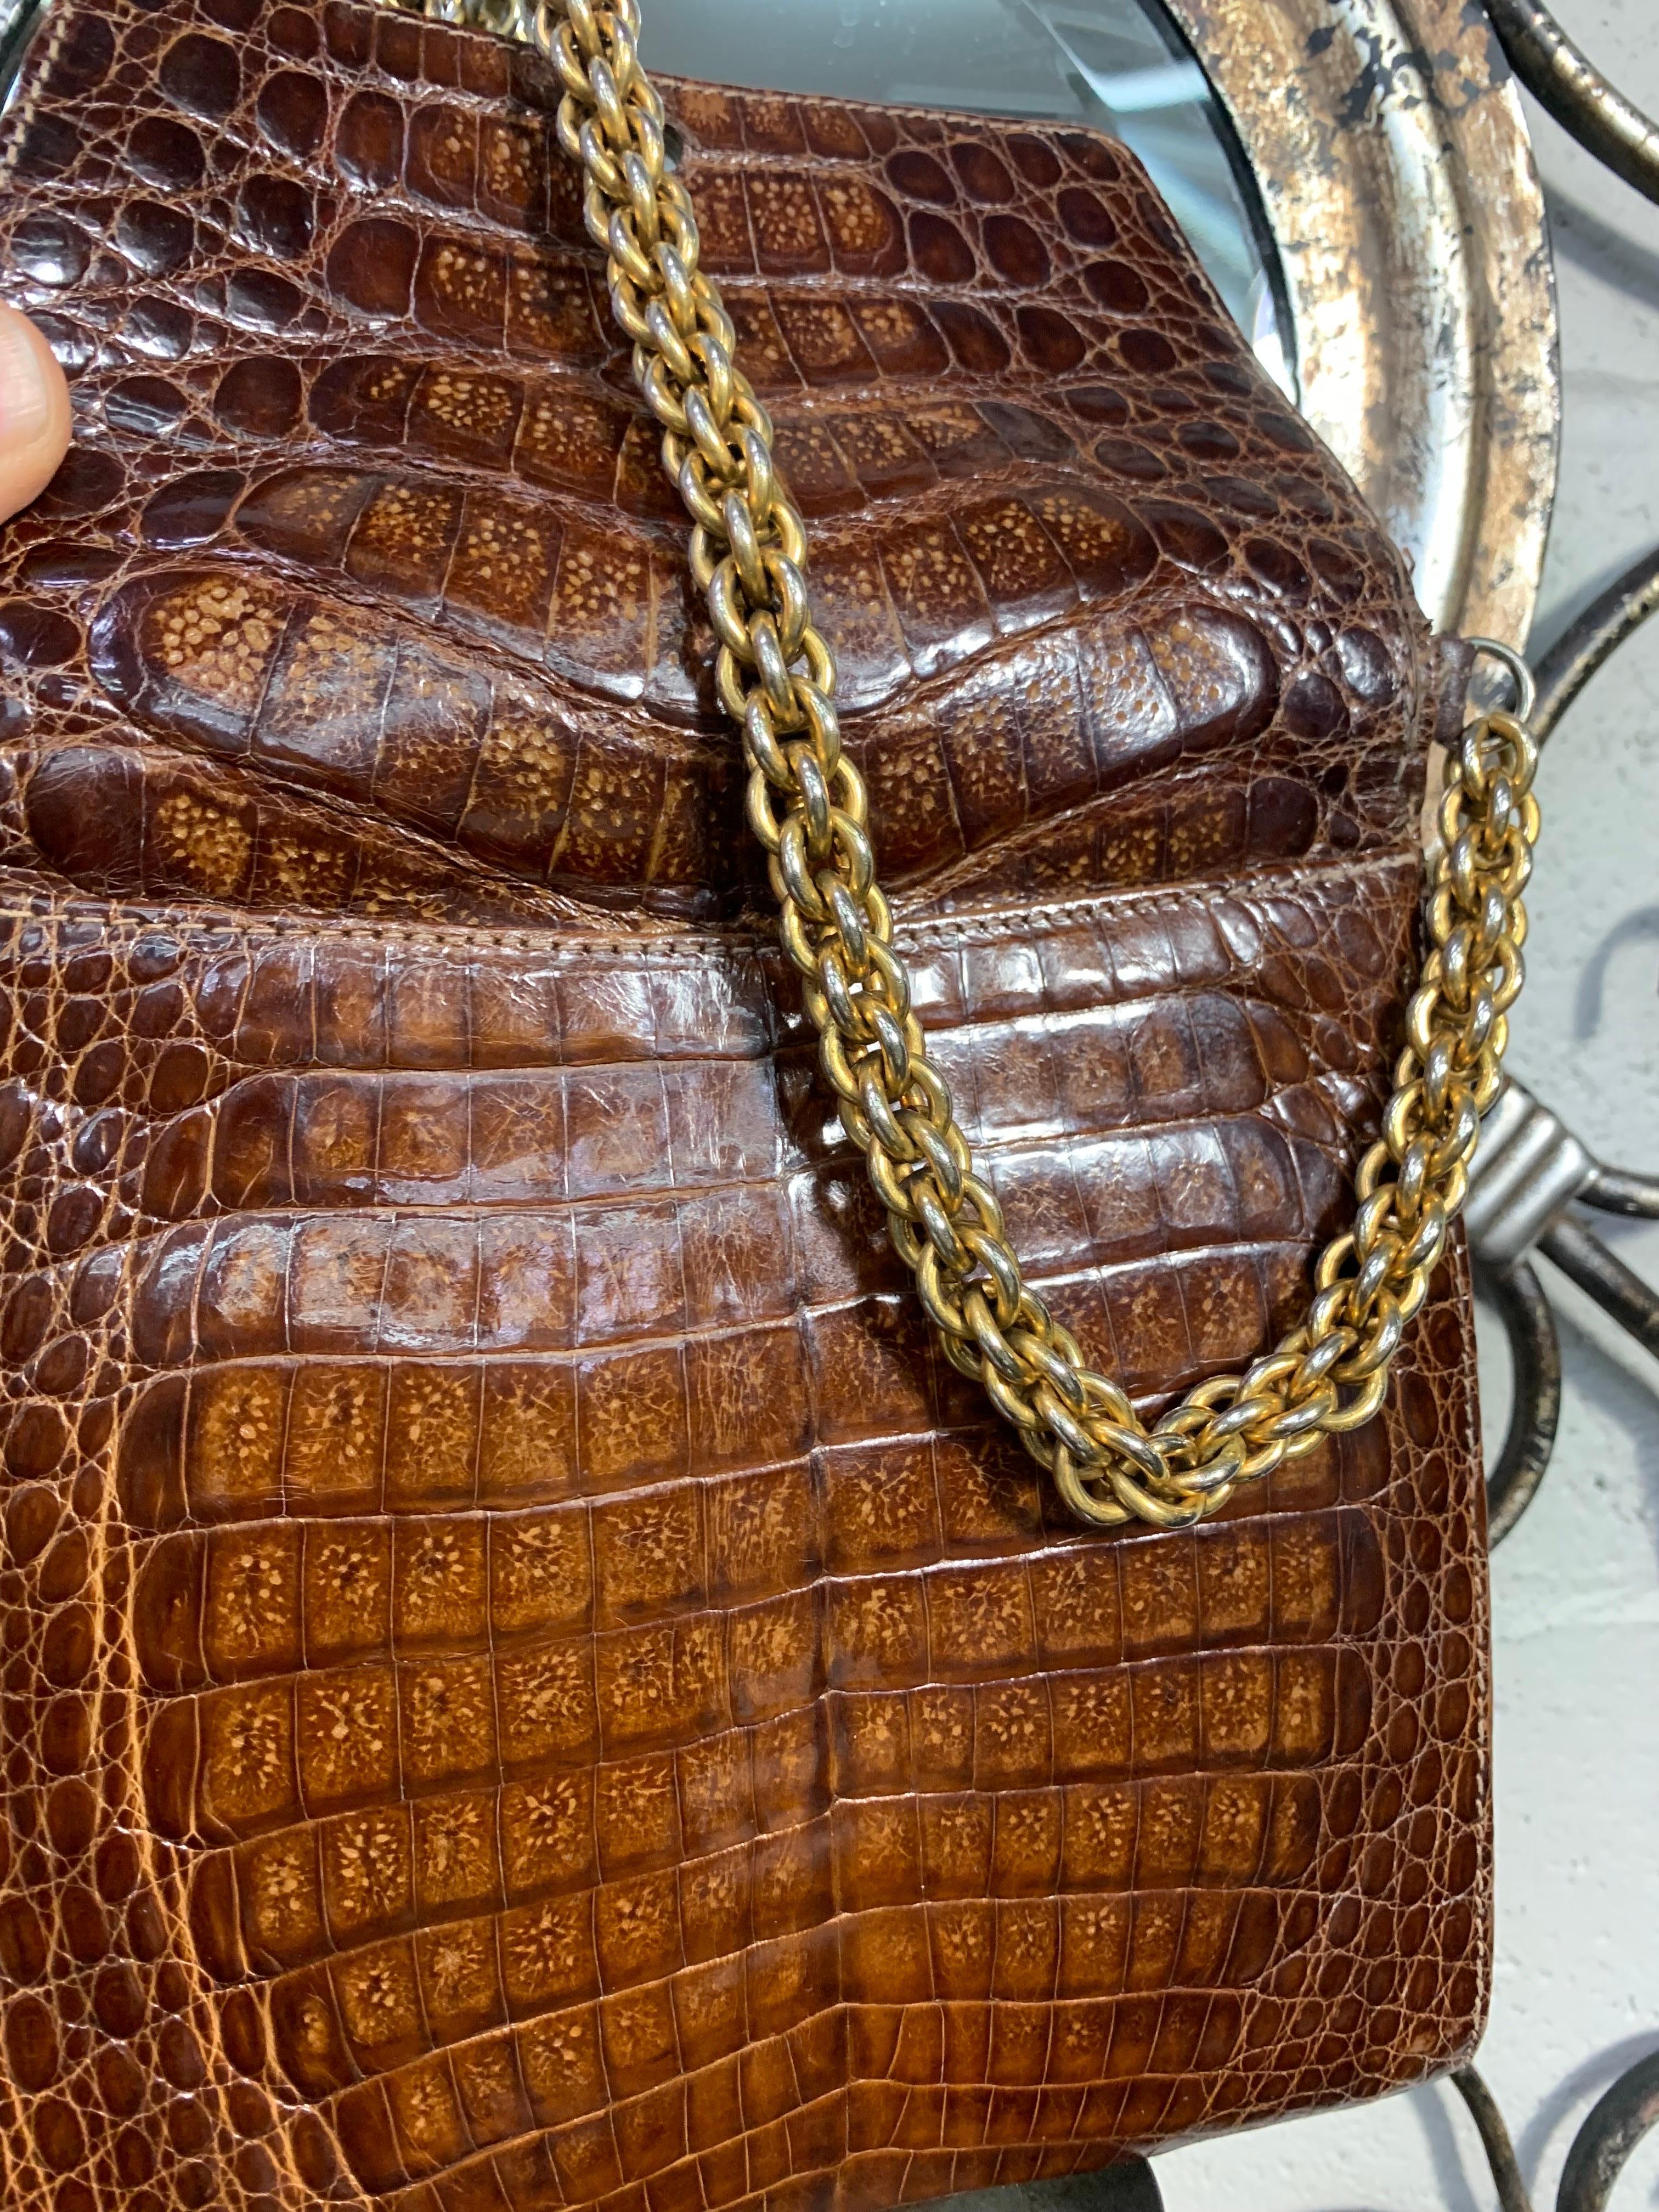 1990 Paloma Picasso Brown Alligator Shoulder Bag w Heavy Rope Chain Strap For Sale 3